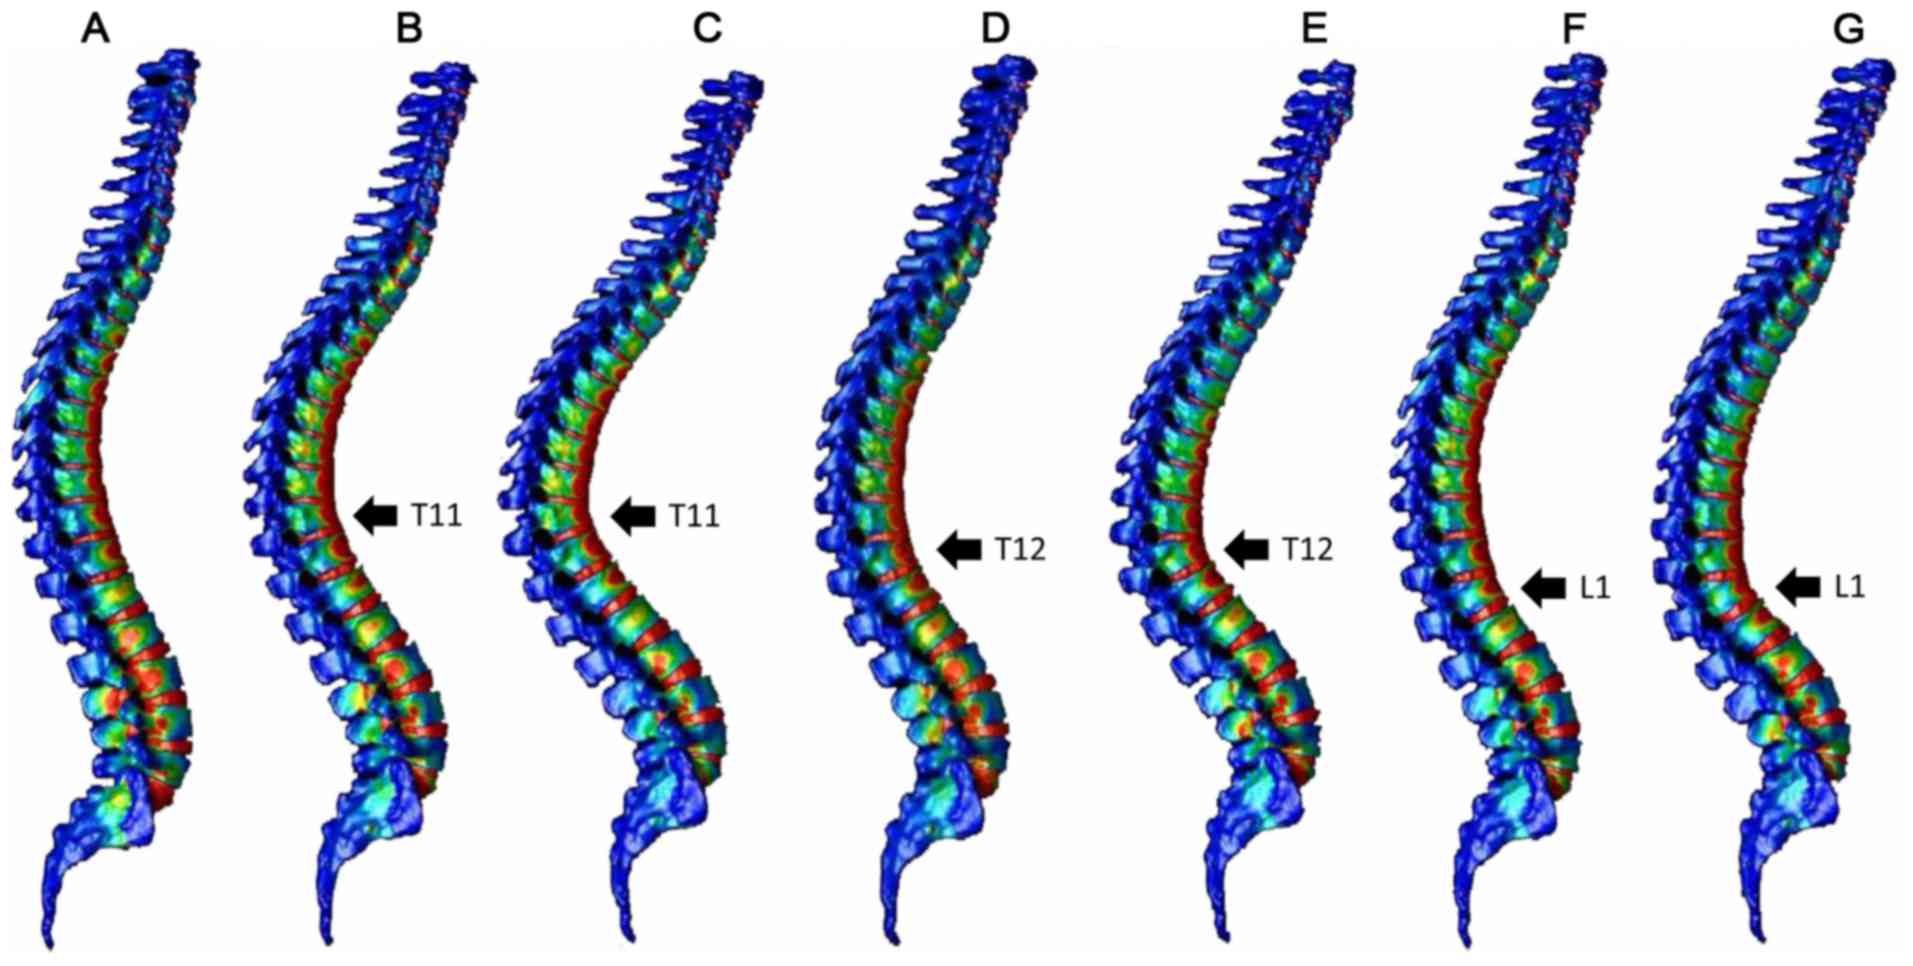 Finite element analysis of compression fractures at the thoracolumbar  junction using models constructed from medical images